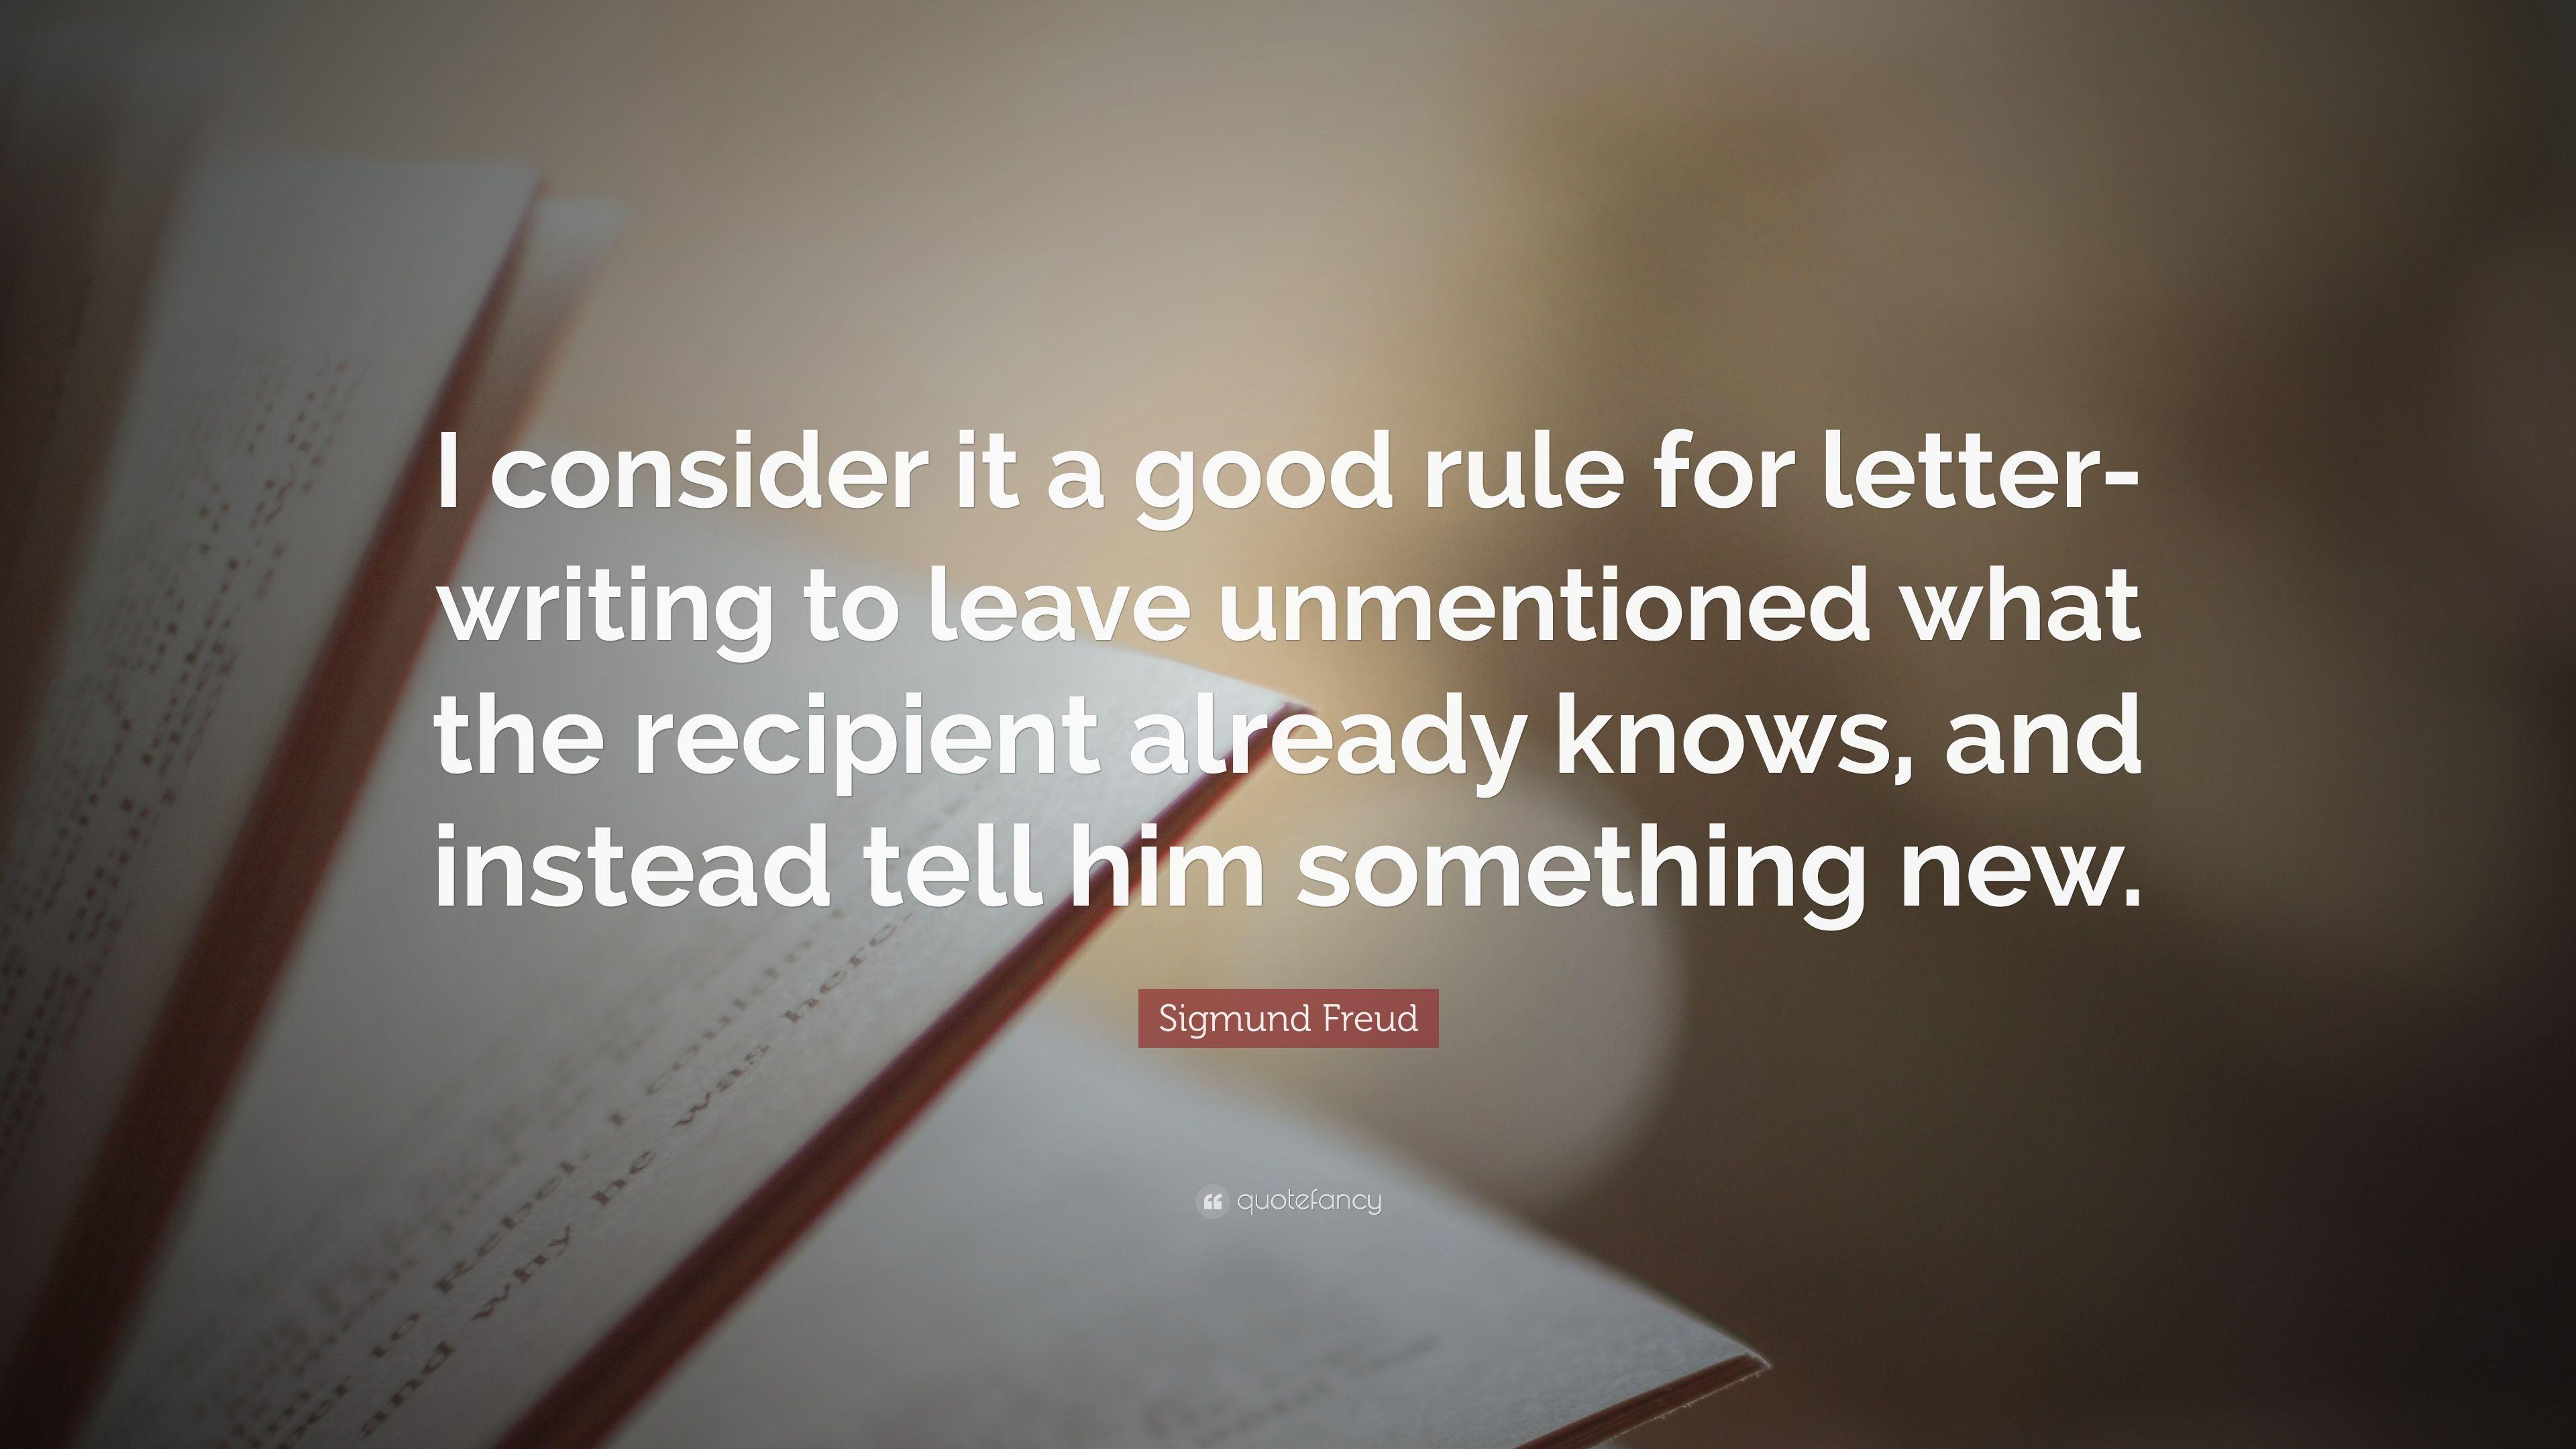 Sigmund Freud Quote: “I Consider It A Good Rule For Letter Writing